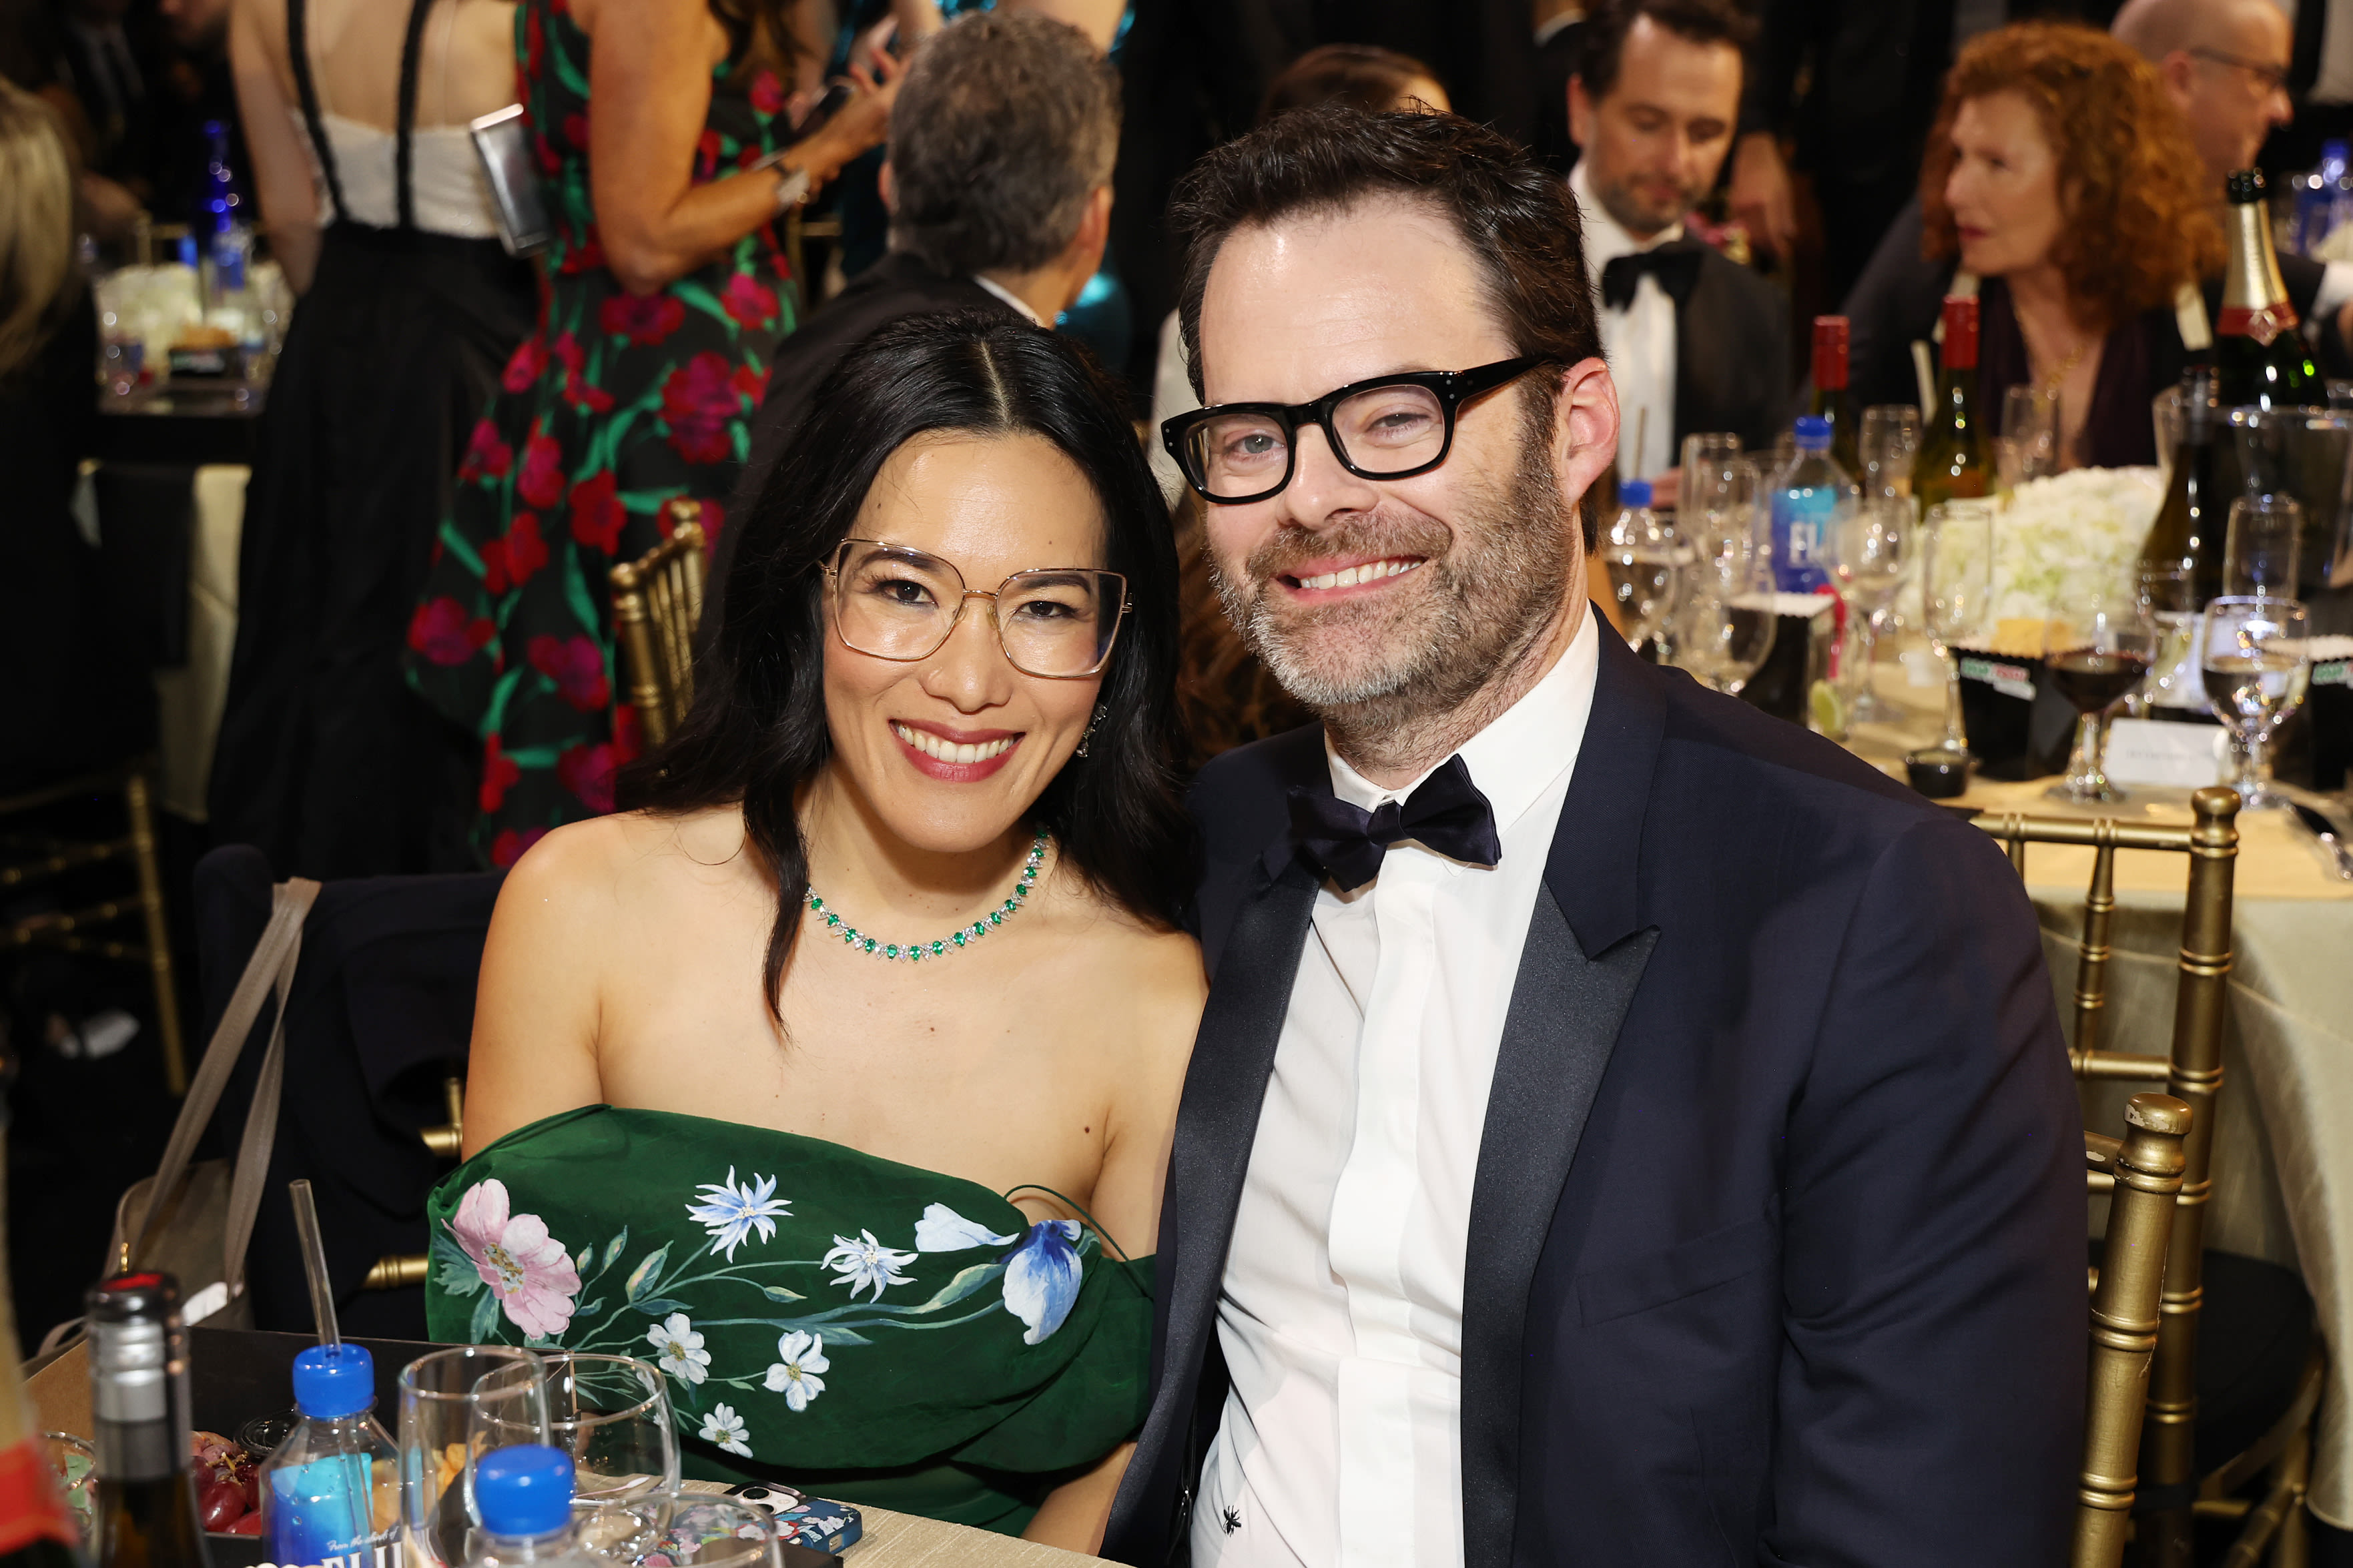 Are Bill Hader and Ali Wong Still Together? Updates on Their Very Low-Key Relationship